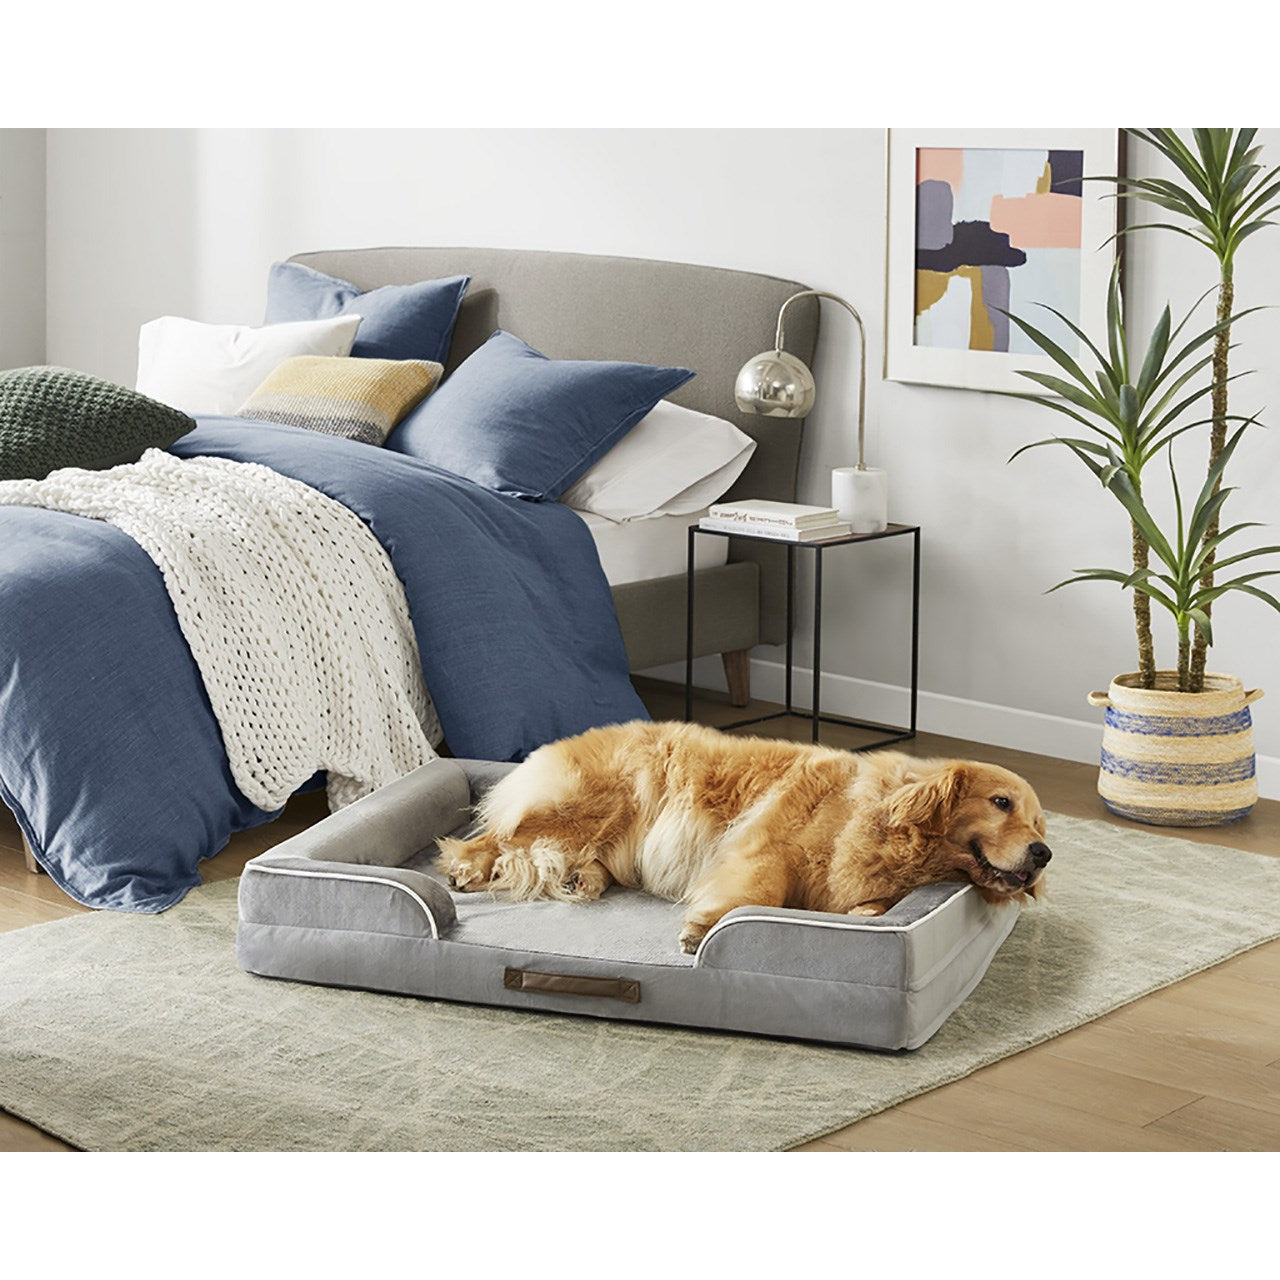 Orthopedic Dog Bed & Cat Bed | Dog Couch with Foam Bolster - Ally/Grey